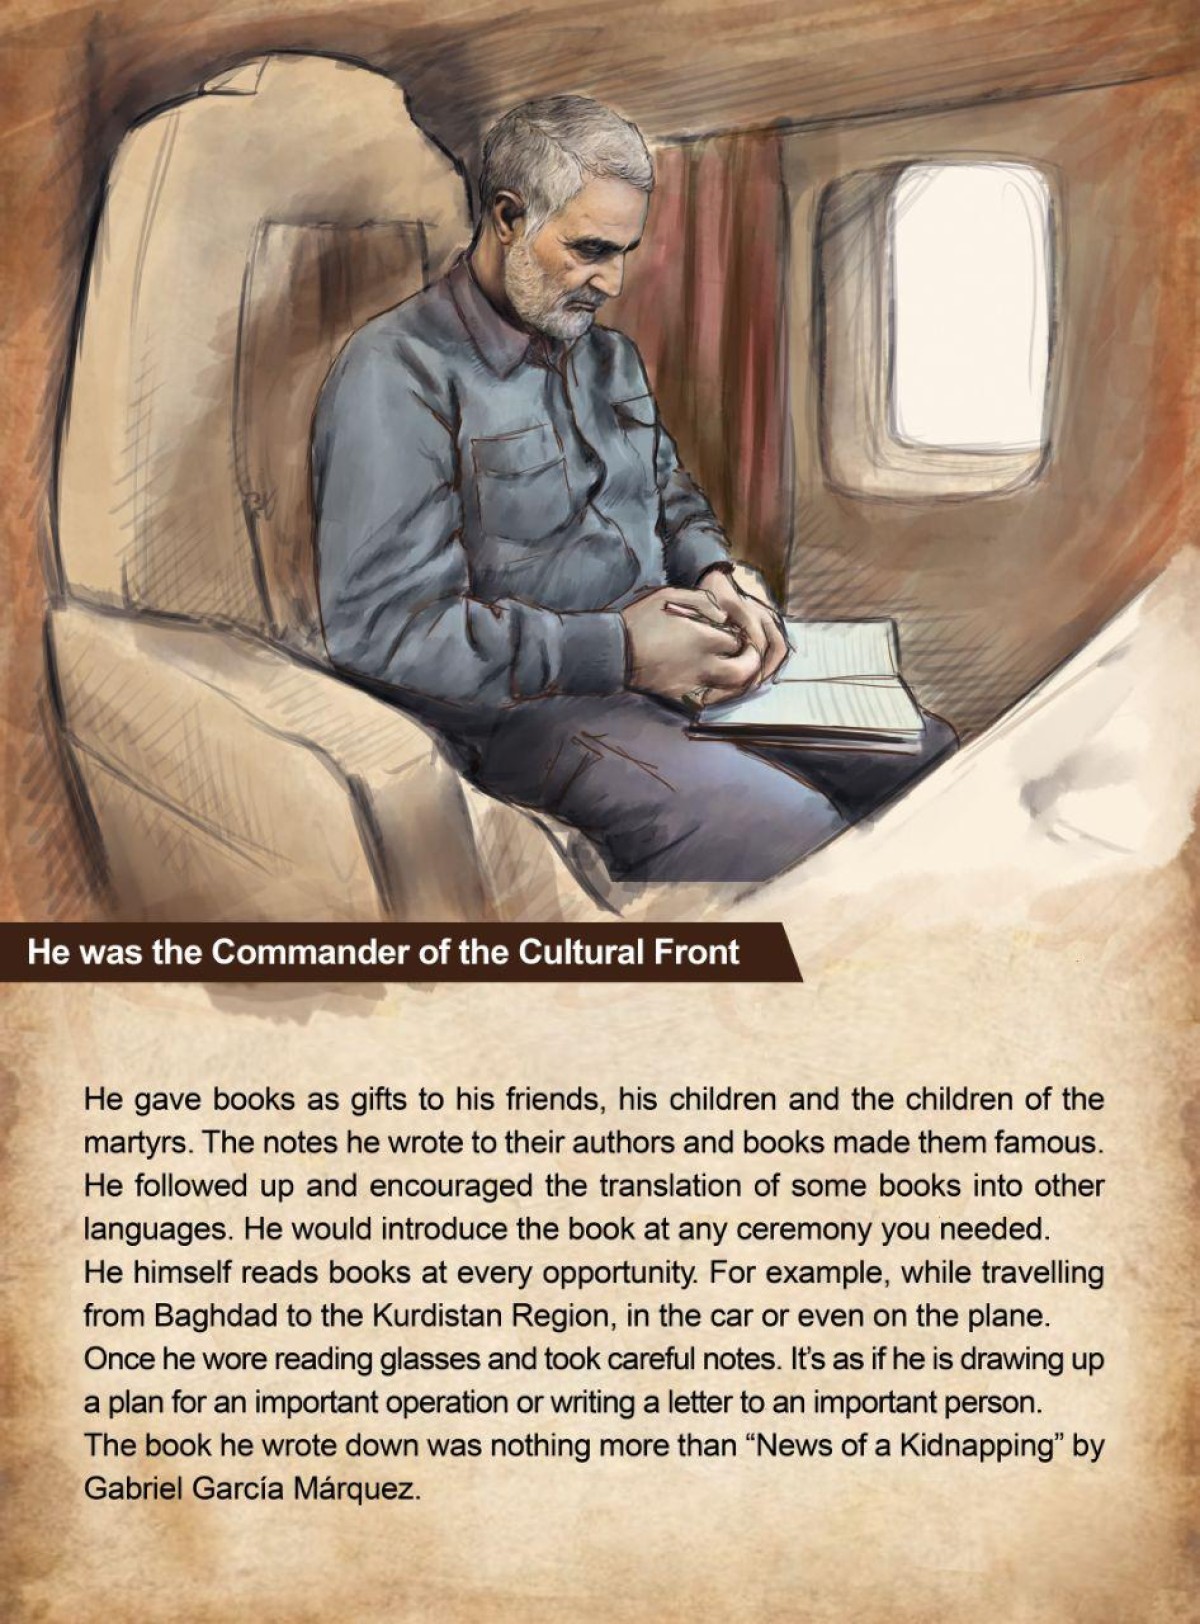 He was the Commander of the Cultural Front